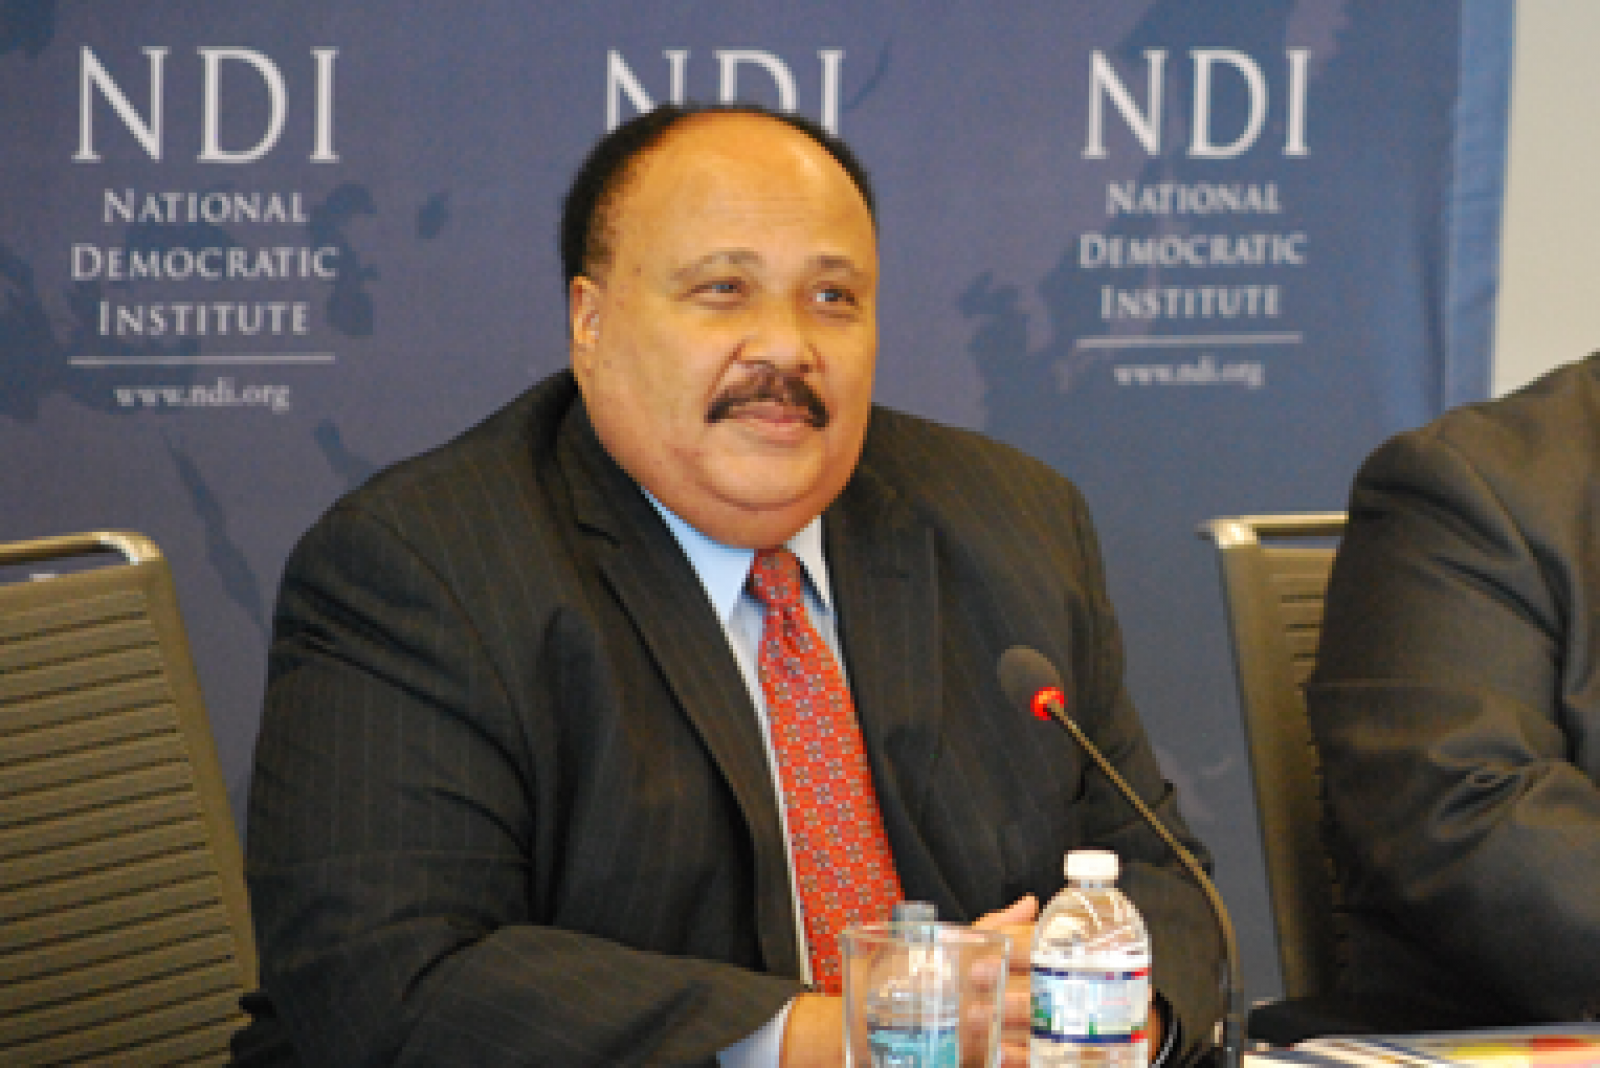 Martin Luther King, III Appeals for Non-Violent Resolution to the South Sudan Crisis